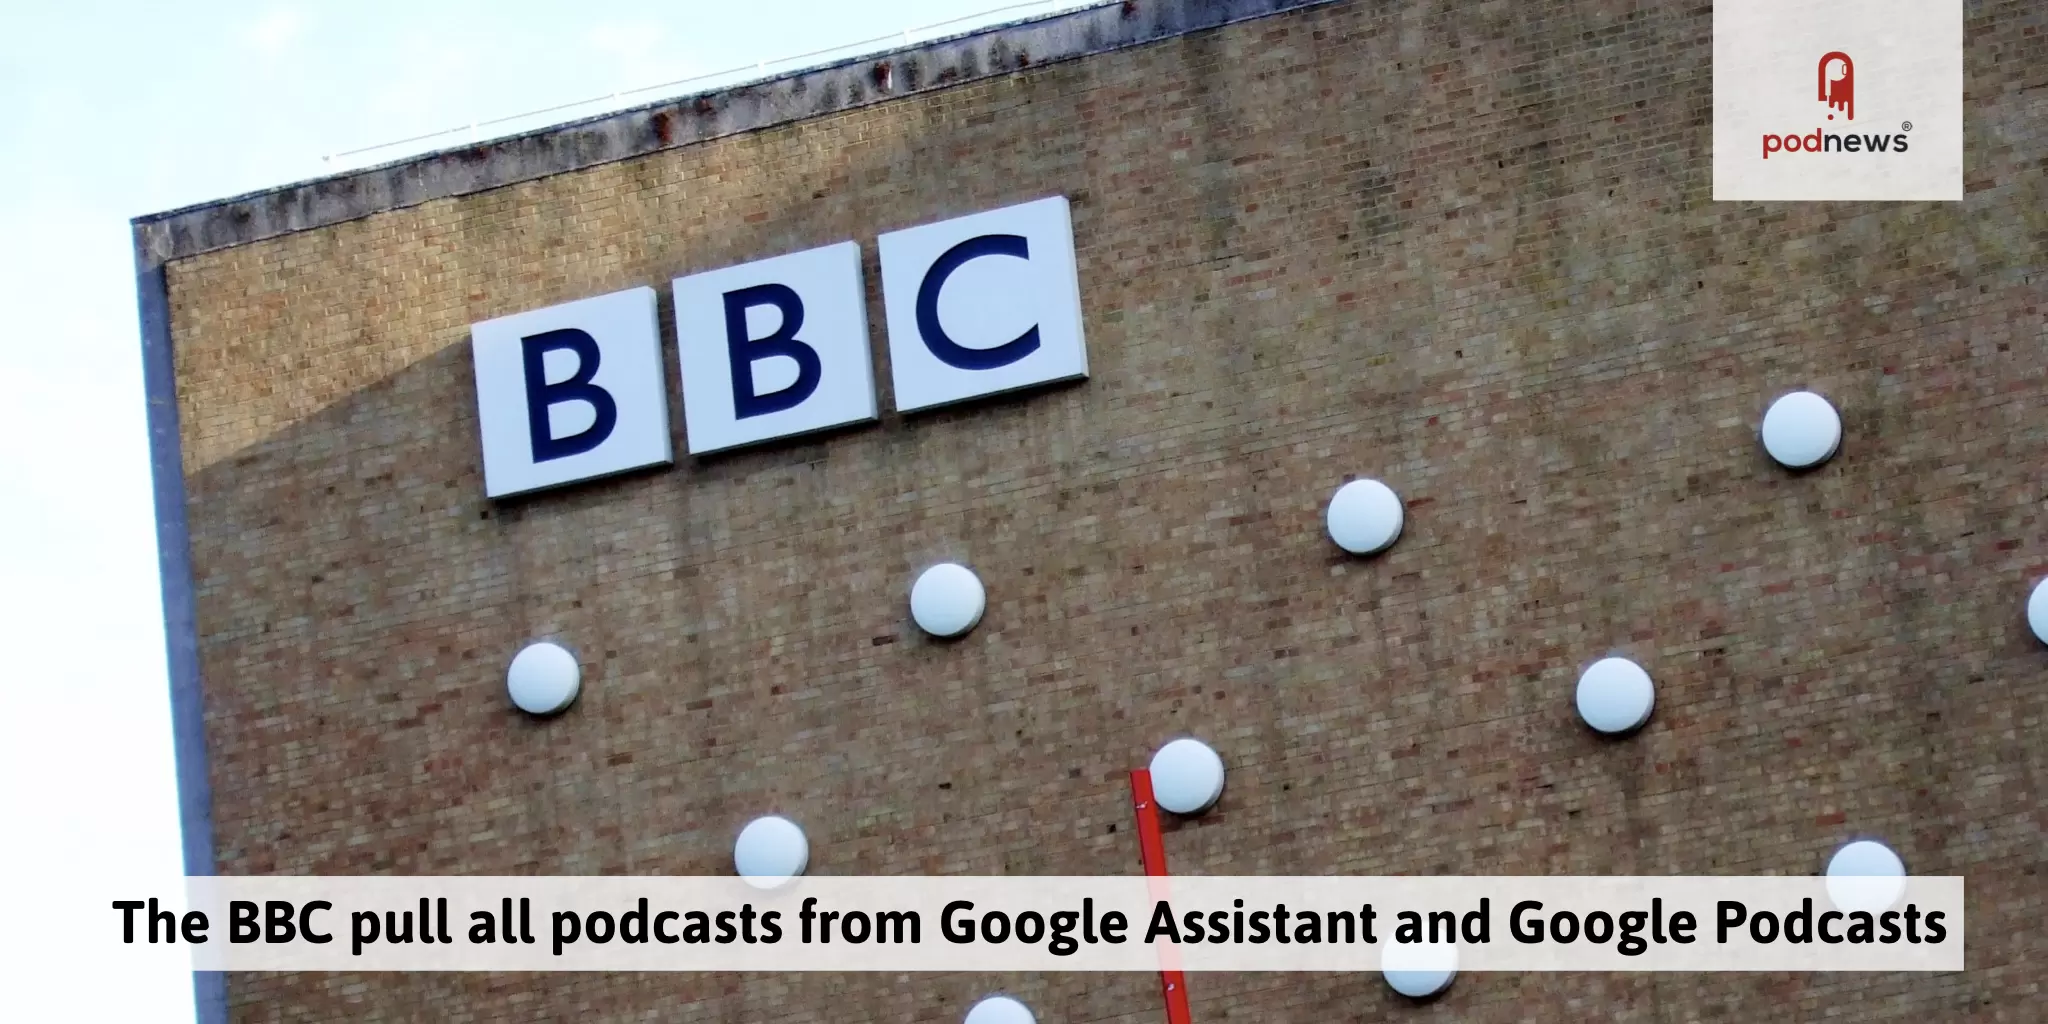 Demon Play bånd Parasit The end of open: BBC blocks its podcasts on Google [UPDATED]